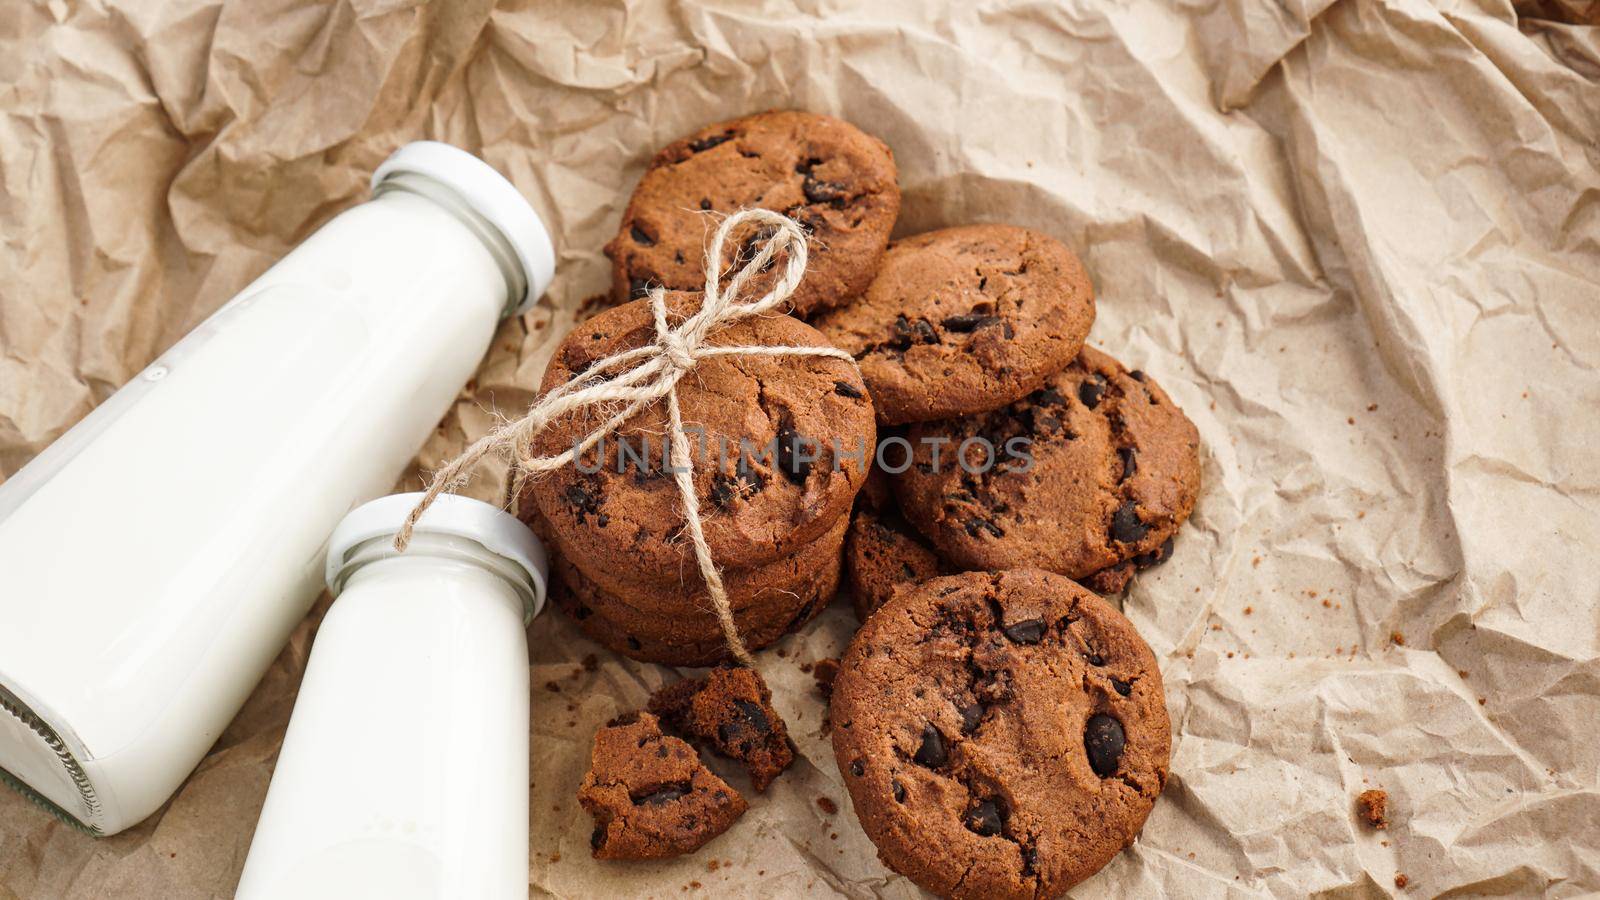 Cookies with chocolate drops on craft paper and bottles of milk. Natural handmade organic snakes for healthy breakfast